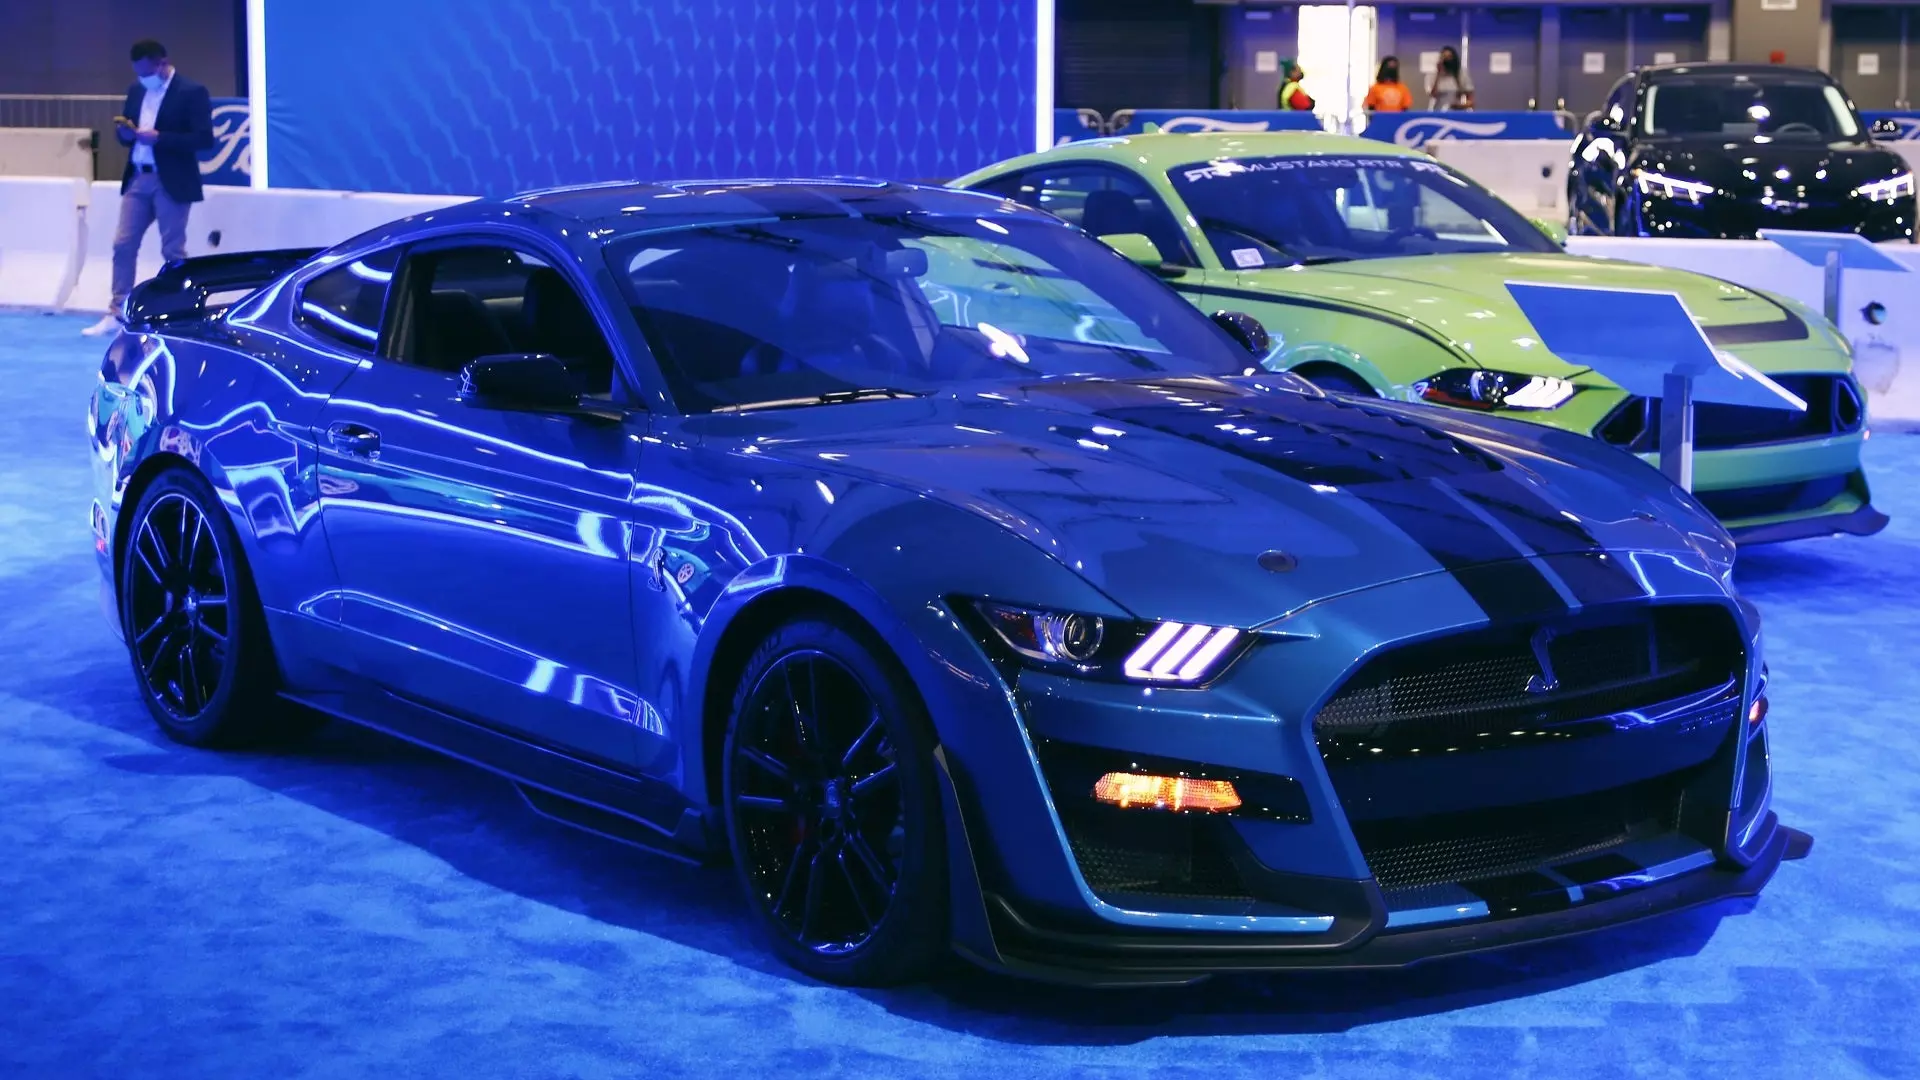 The Ford Mustang Shelby GT500 Is the Everyman’s Halo Car